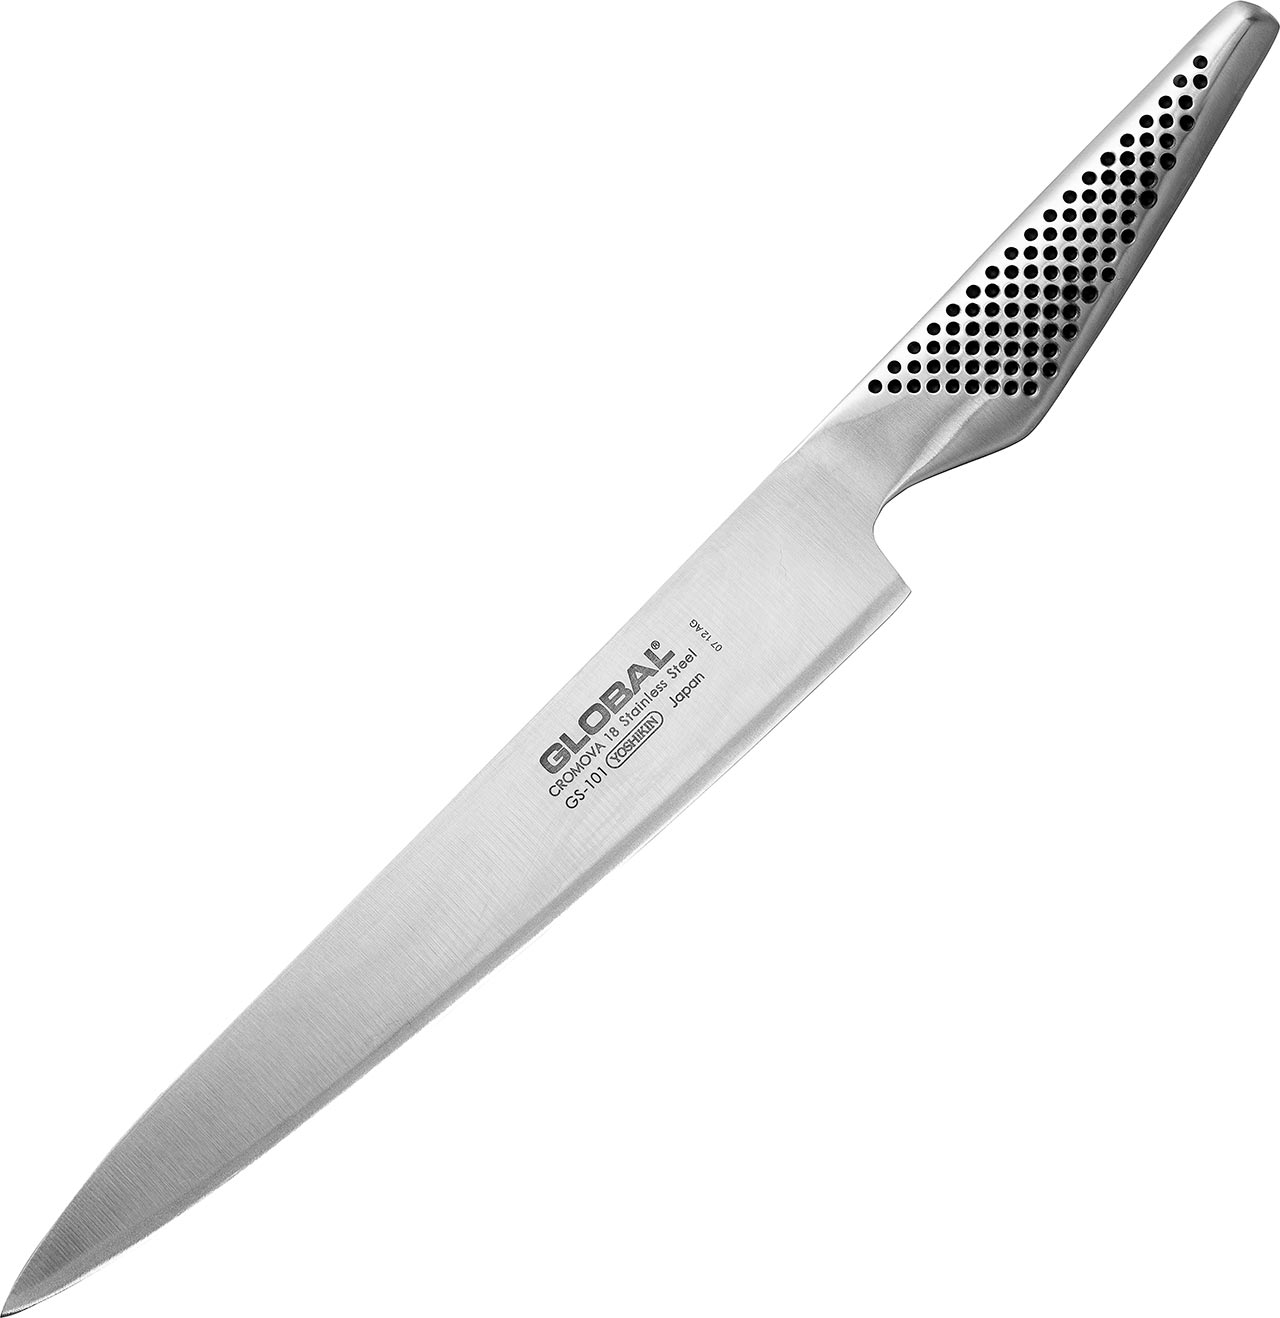 Global Carving Knife 20cm GS-101